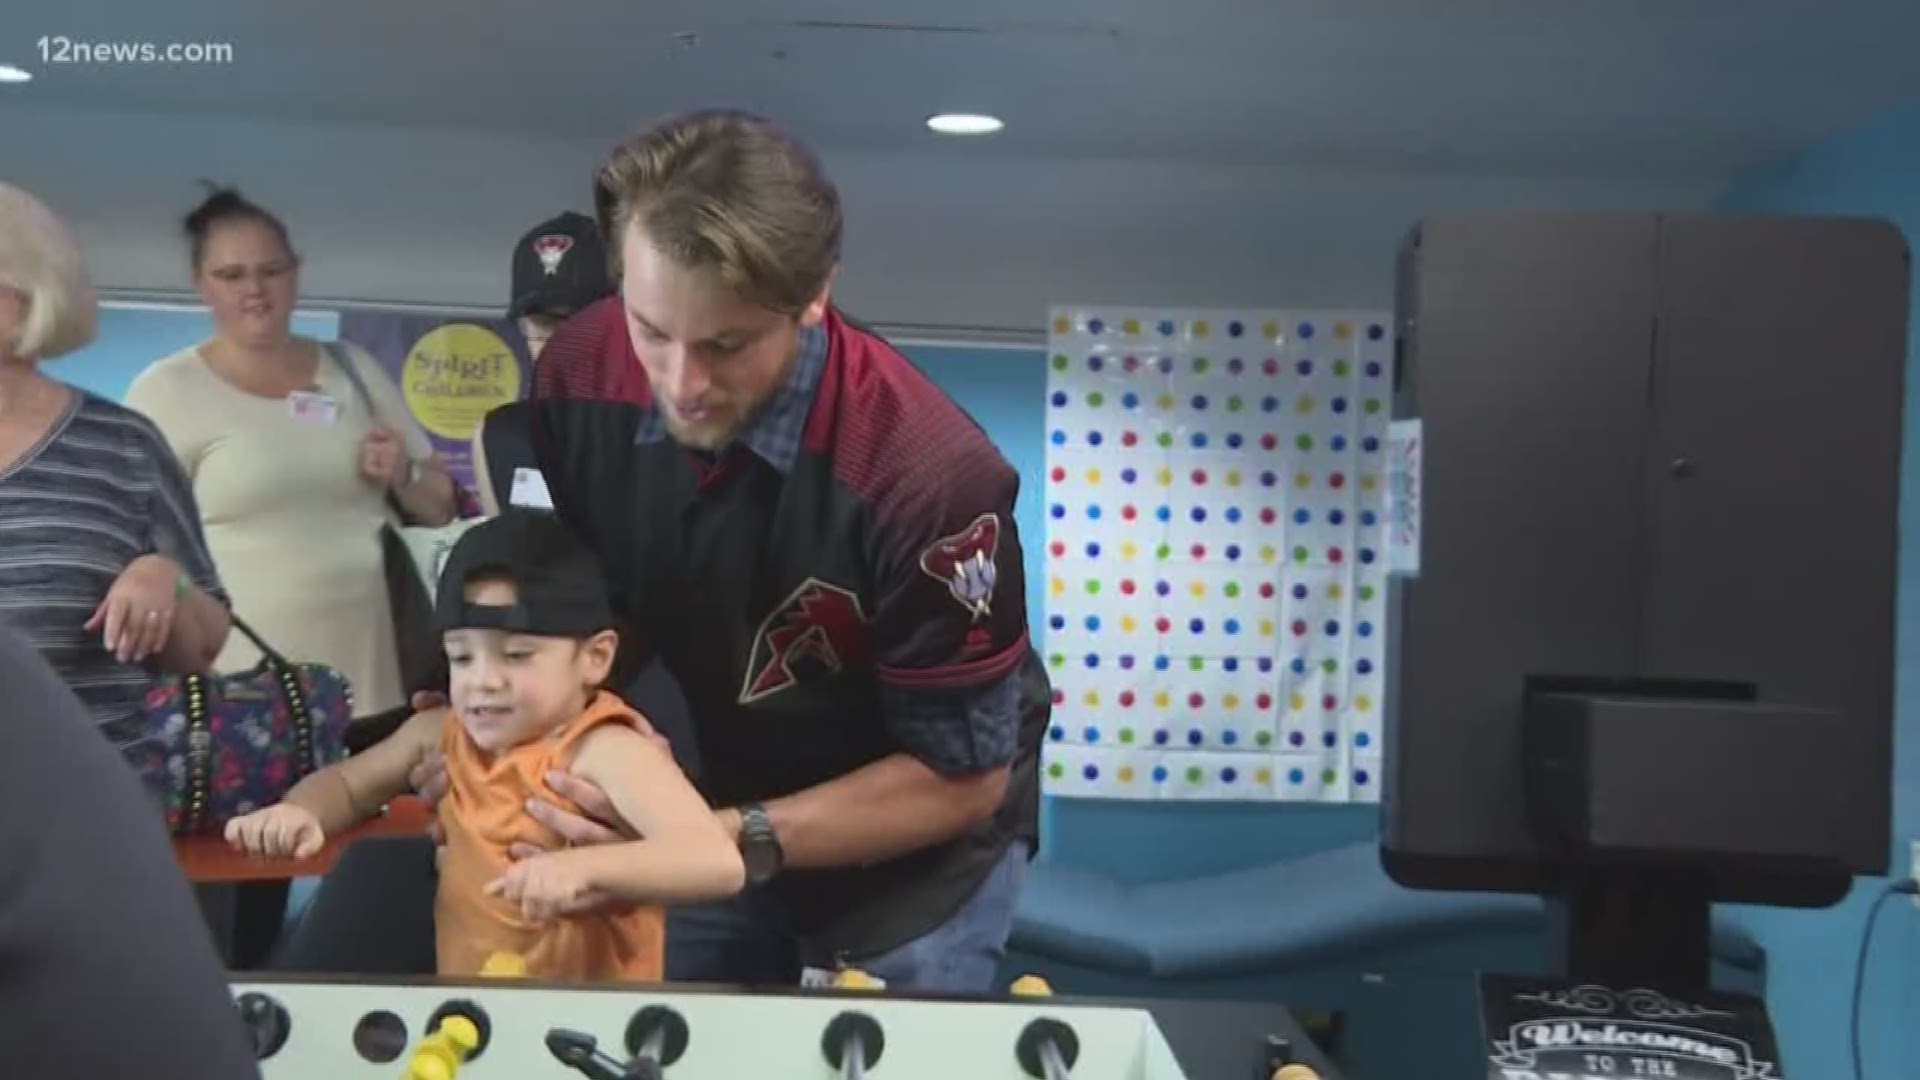 Before the Diamondbacks take the field against the Rockies Tuesday, a few Dbacks pitchers stopped by Phoenix Children's Hospital to help put some smiles on kids' faces. The players said they appreciate the interaction just as much as the kids.